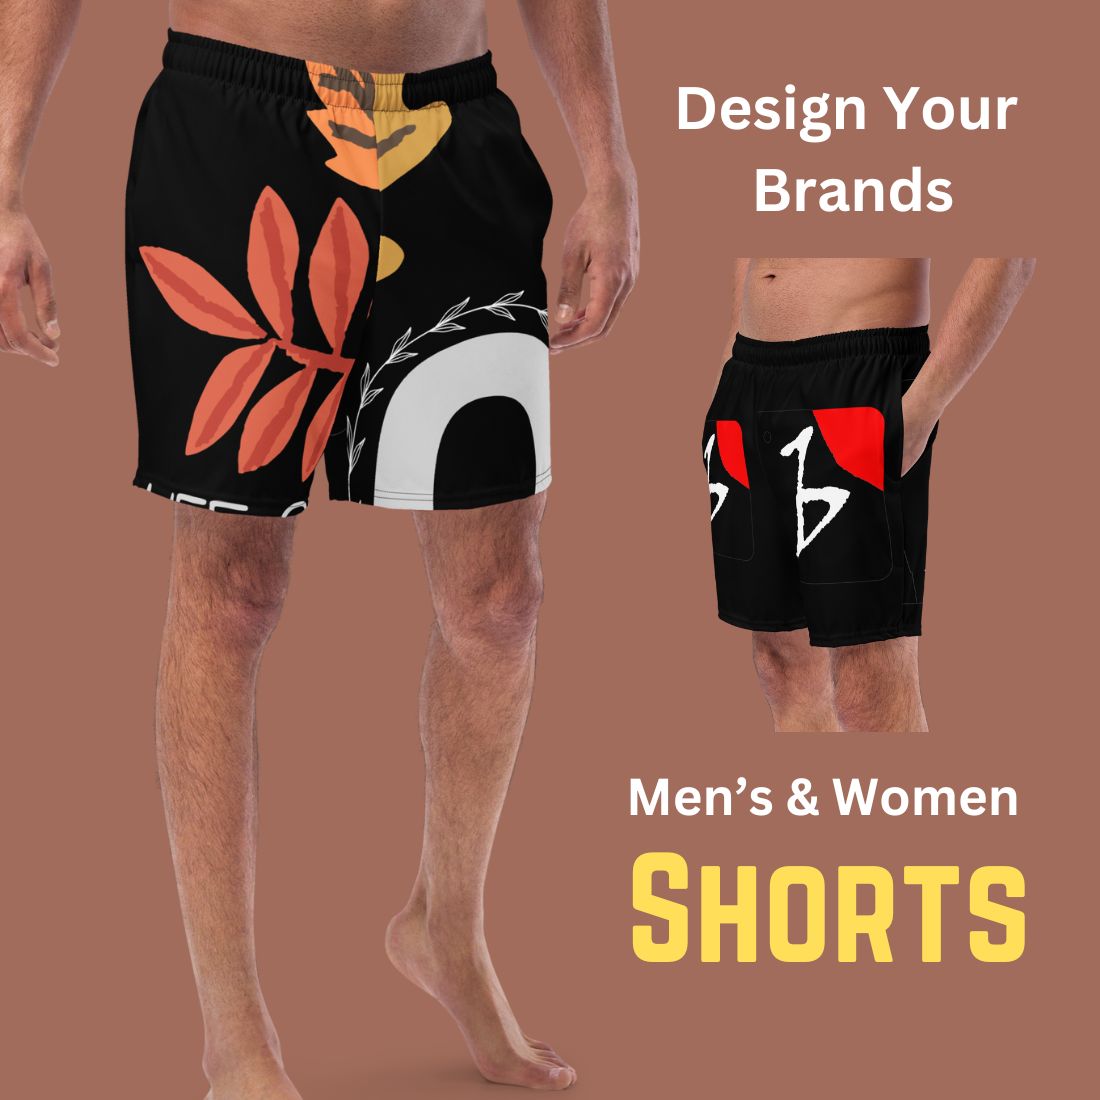 Shorts for Men' s & Women for Summer / Sports / Fancy / Trending design worldwide buy now for your projects preview image.